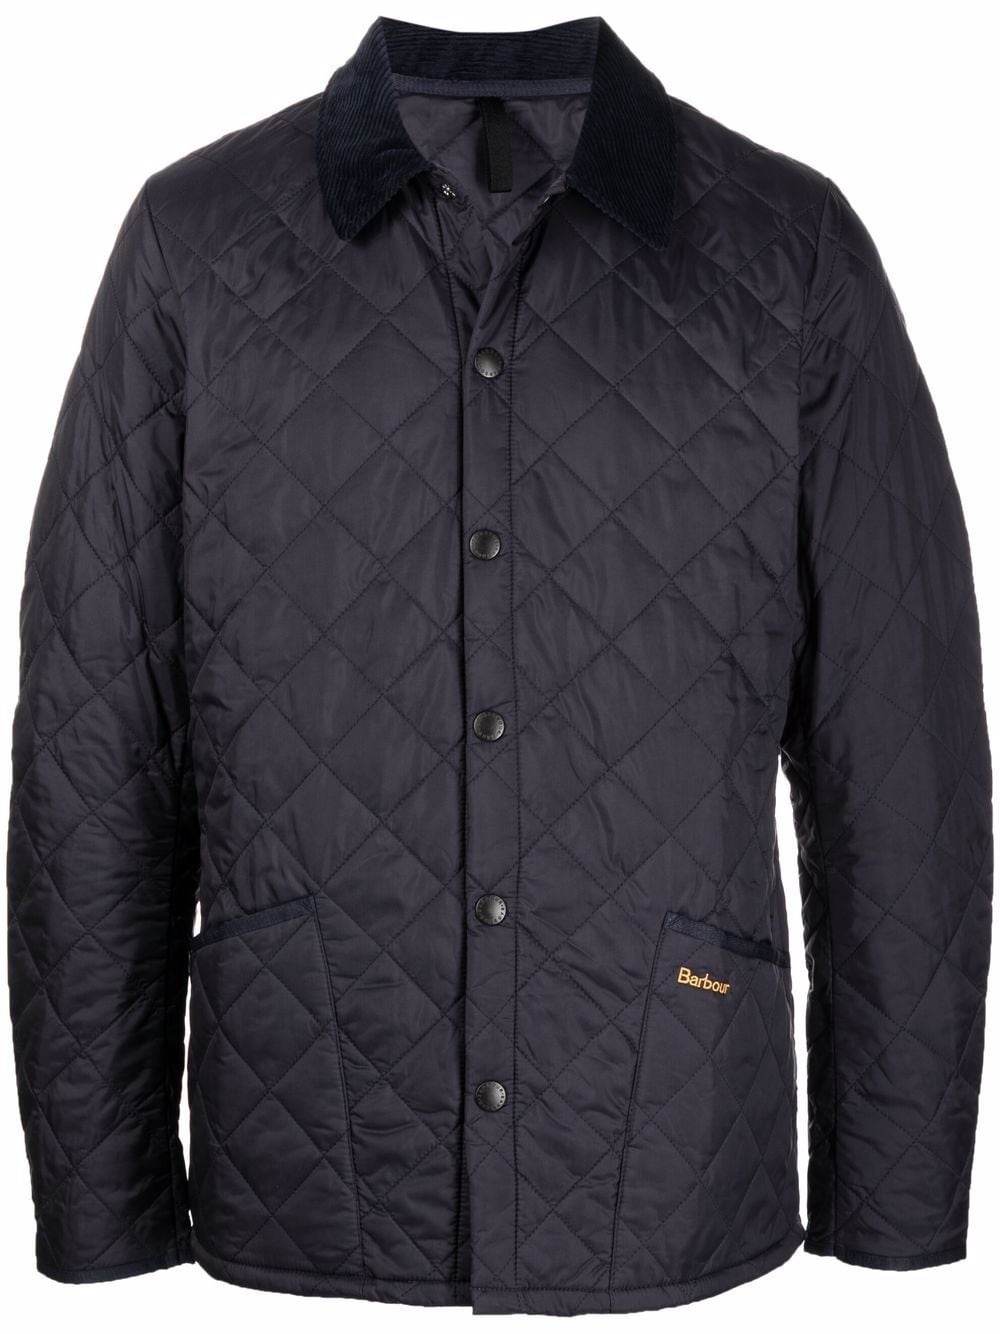 Liddesdale quilted jacket - 1